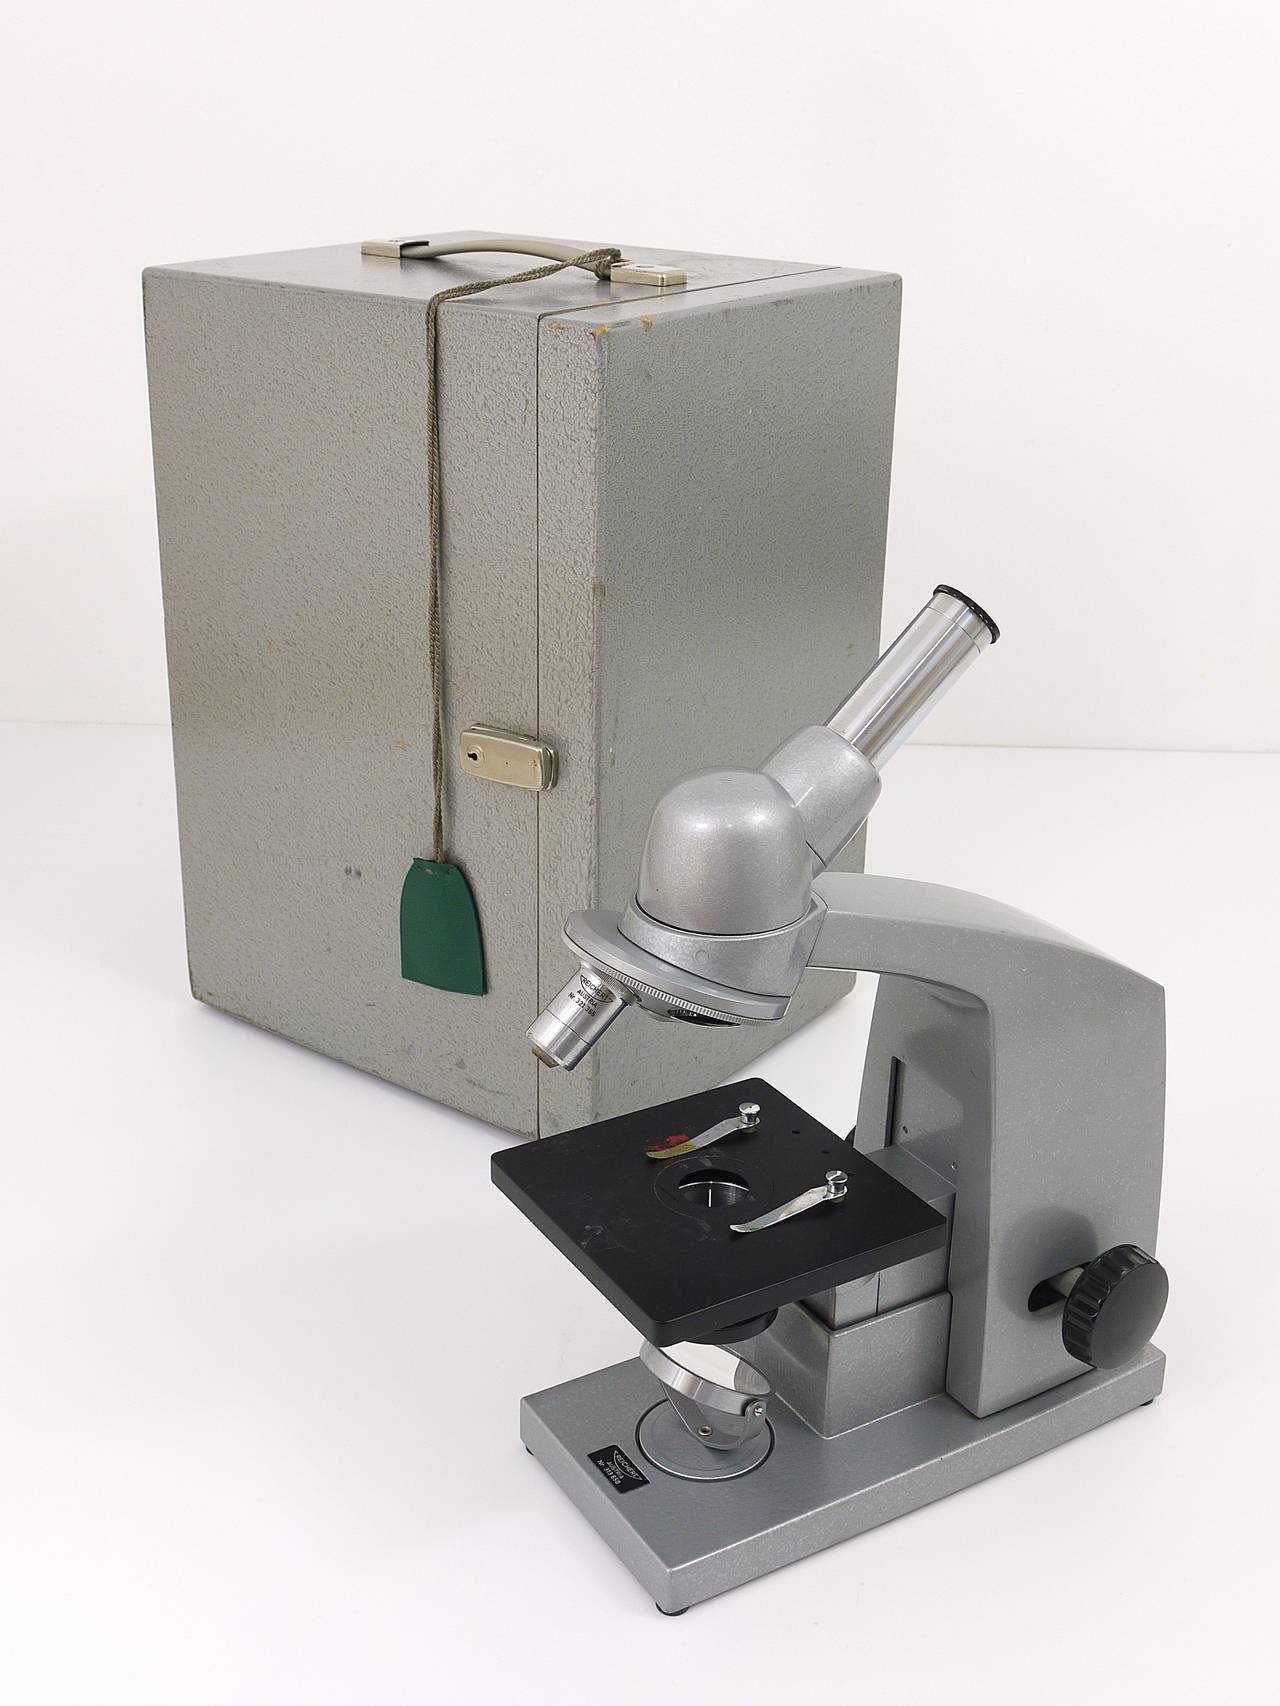 A very rare award-winning microscope, model Neopan, designed in 1963 by the Viennese architect and designer Carl Aubock. Executed by Reichert Austria. In good condition, fully working. With original case and accessories.